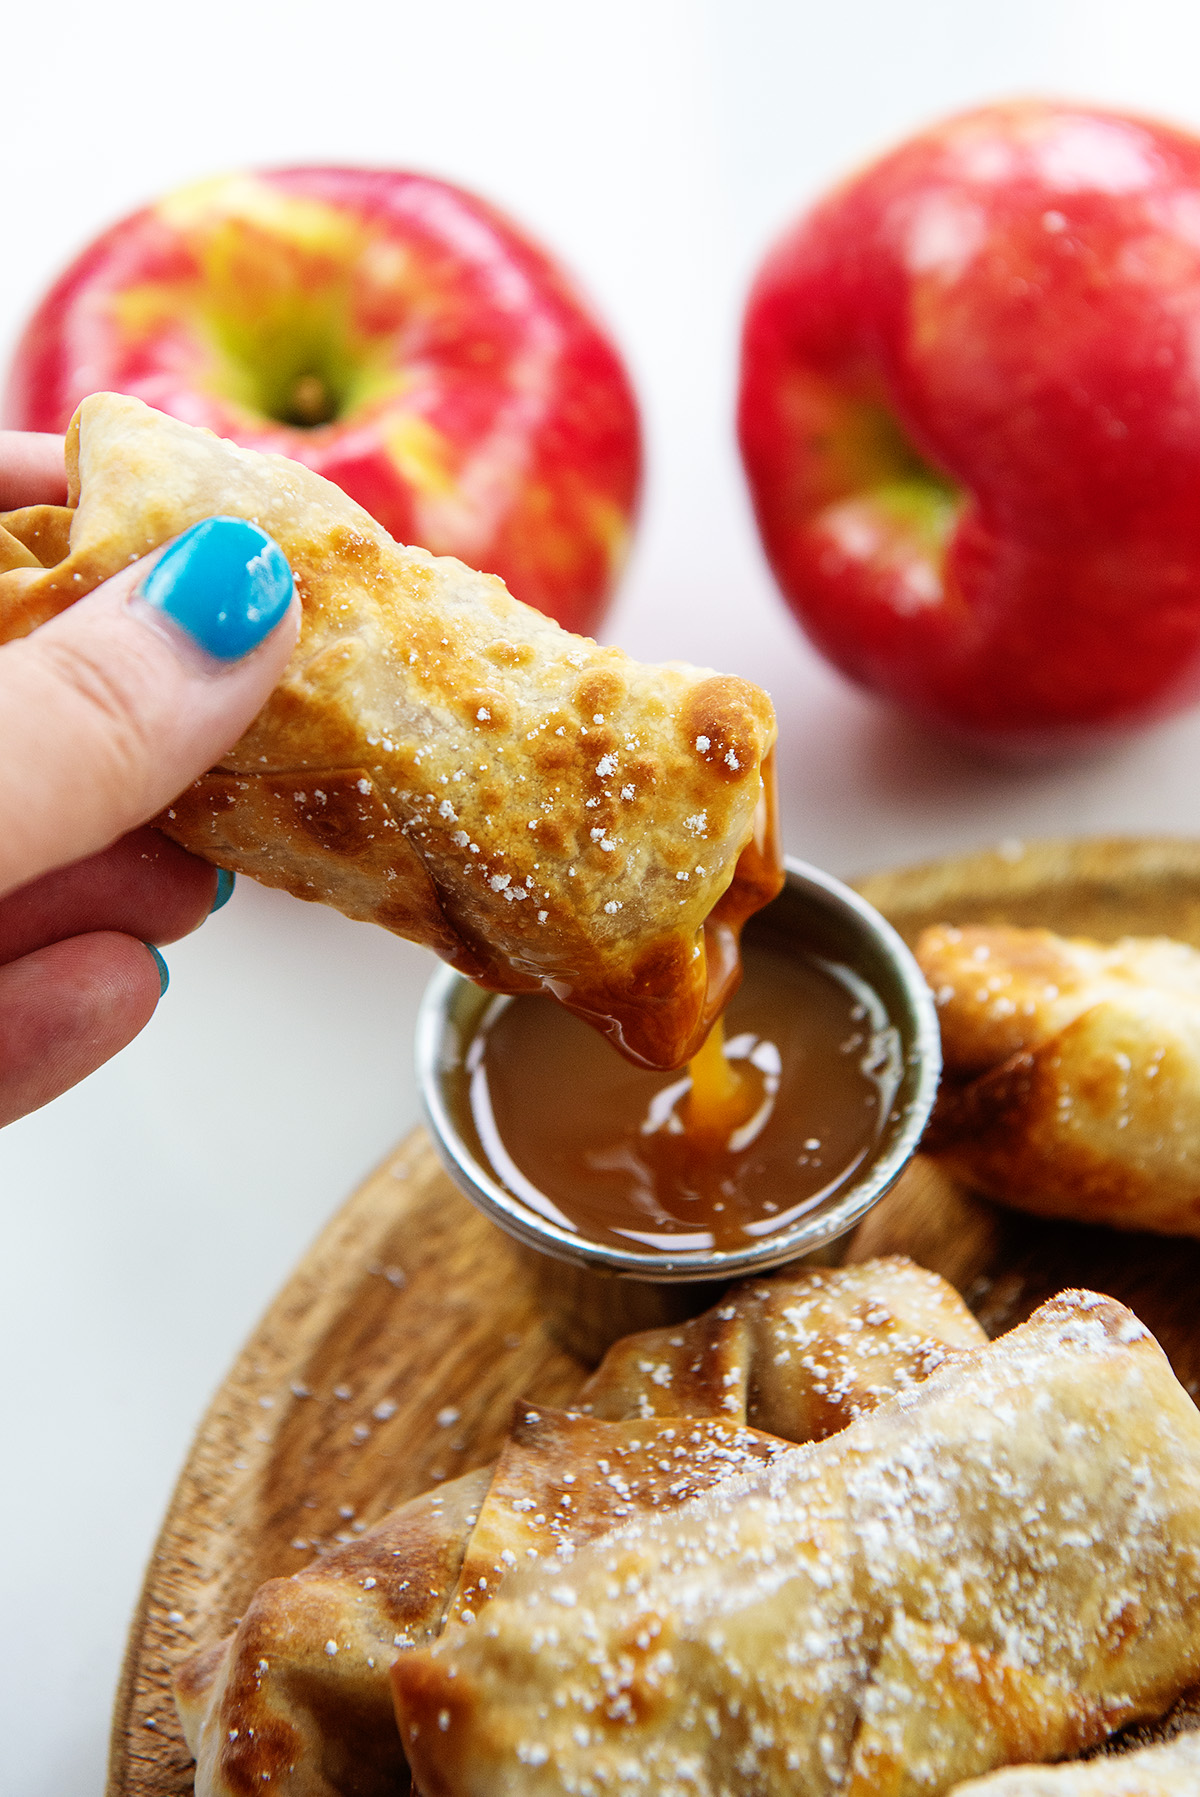 An apple pie egg roll being dipped into a cup of caramel